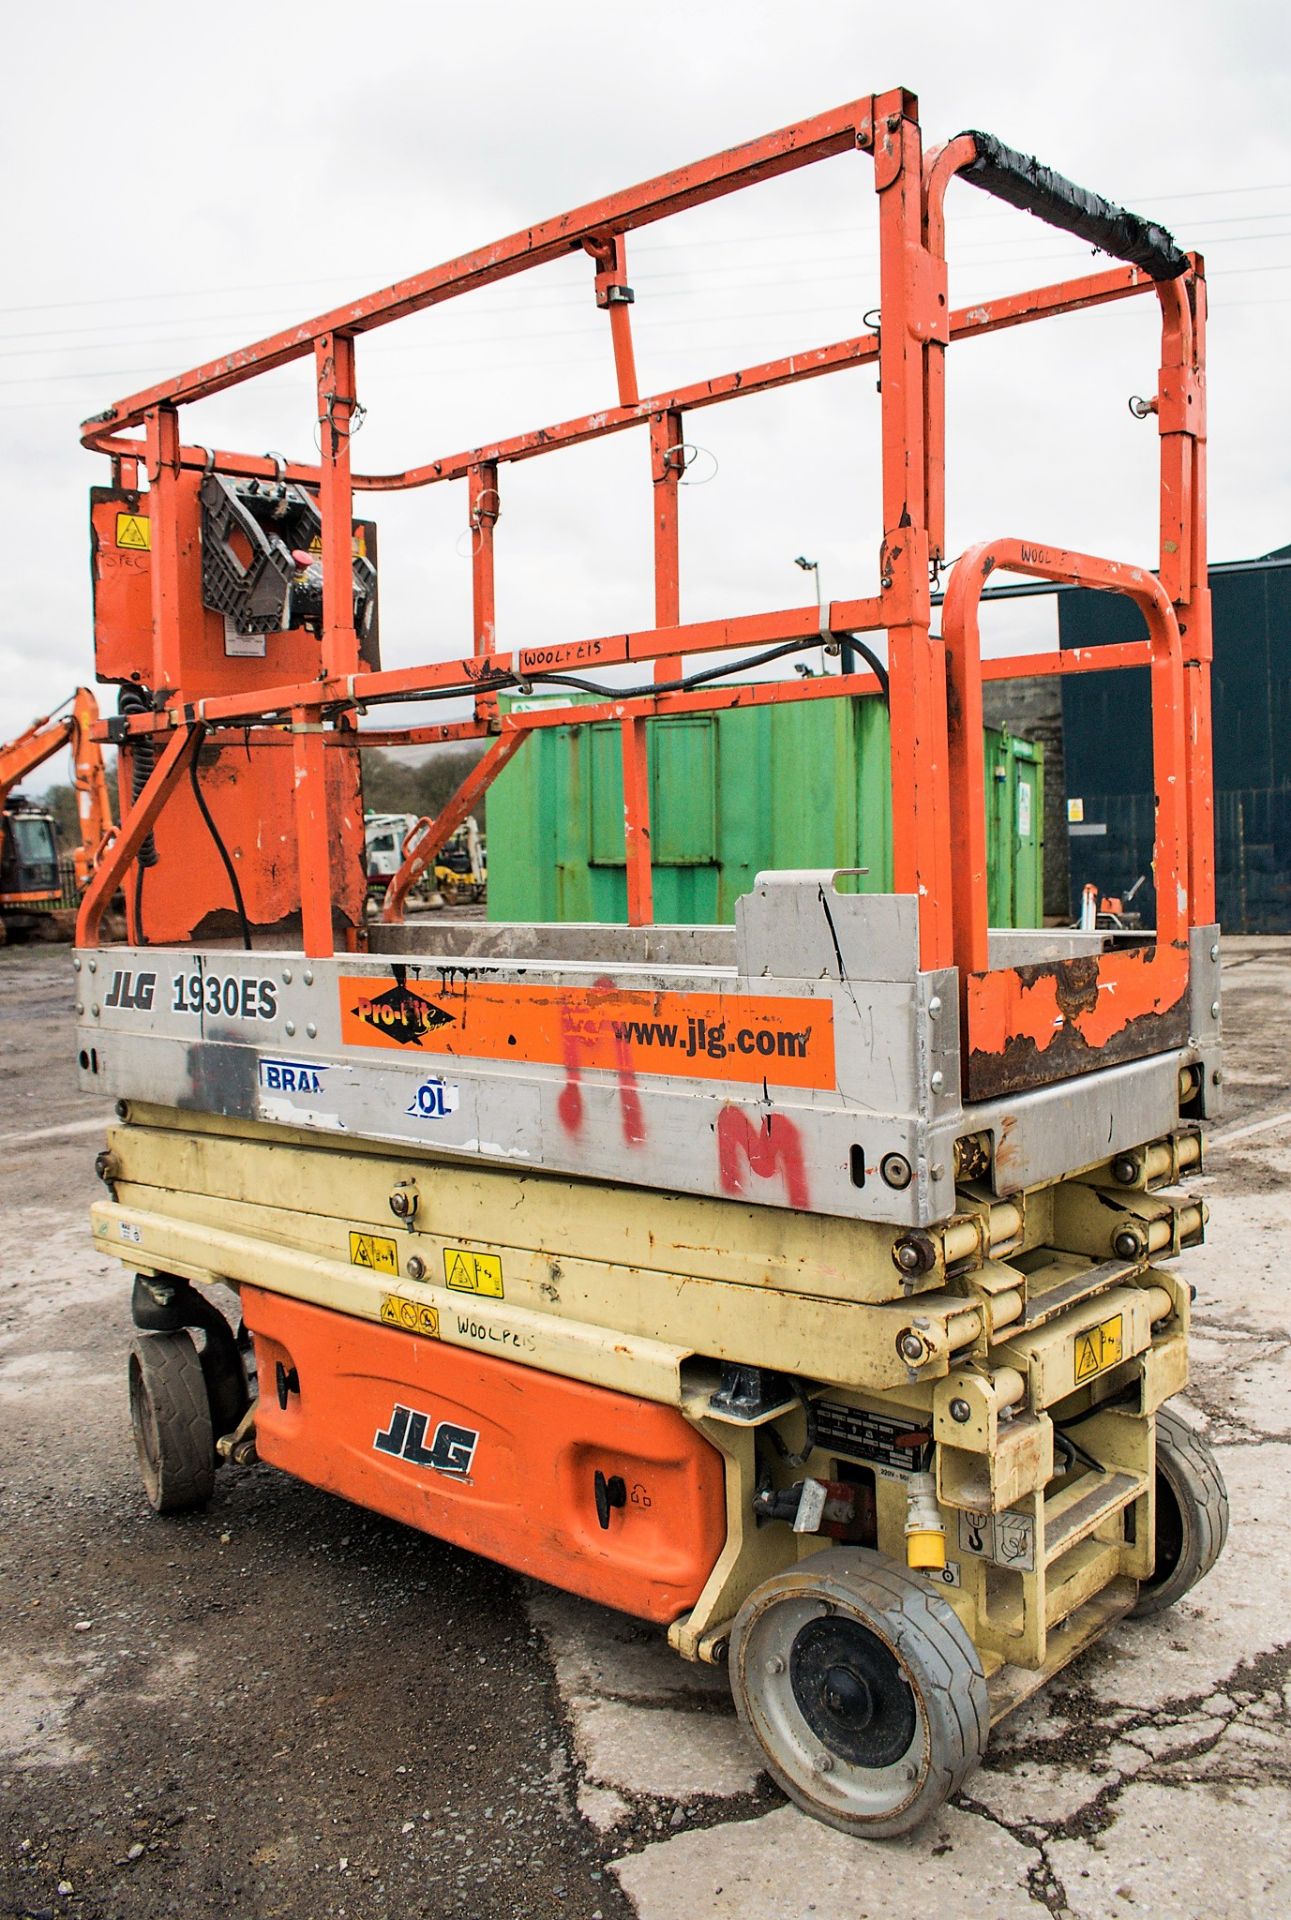 JLG 1930ES battery electric scissor lift Year: 2006 S/N: 7419 Recorded Hours: 160 WOOLPE15 - Image 2 of 7